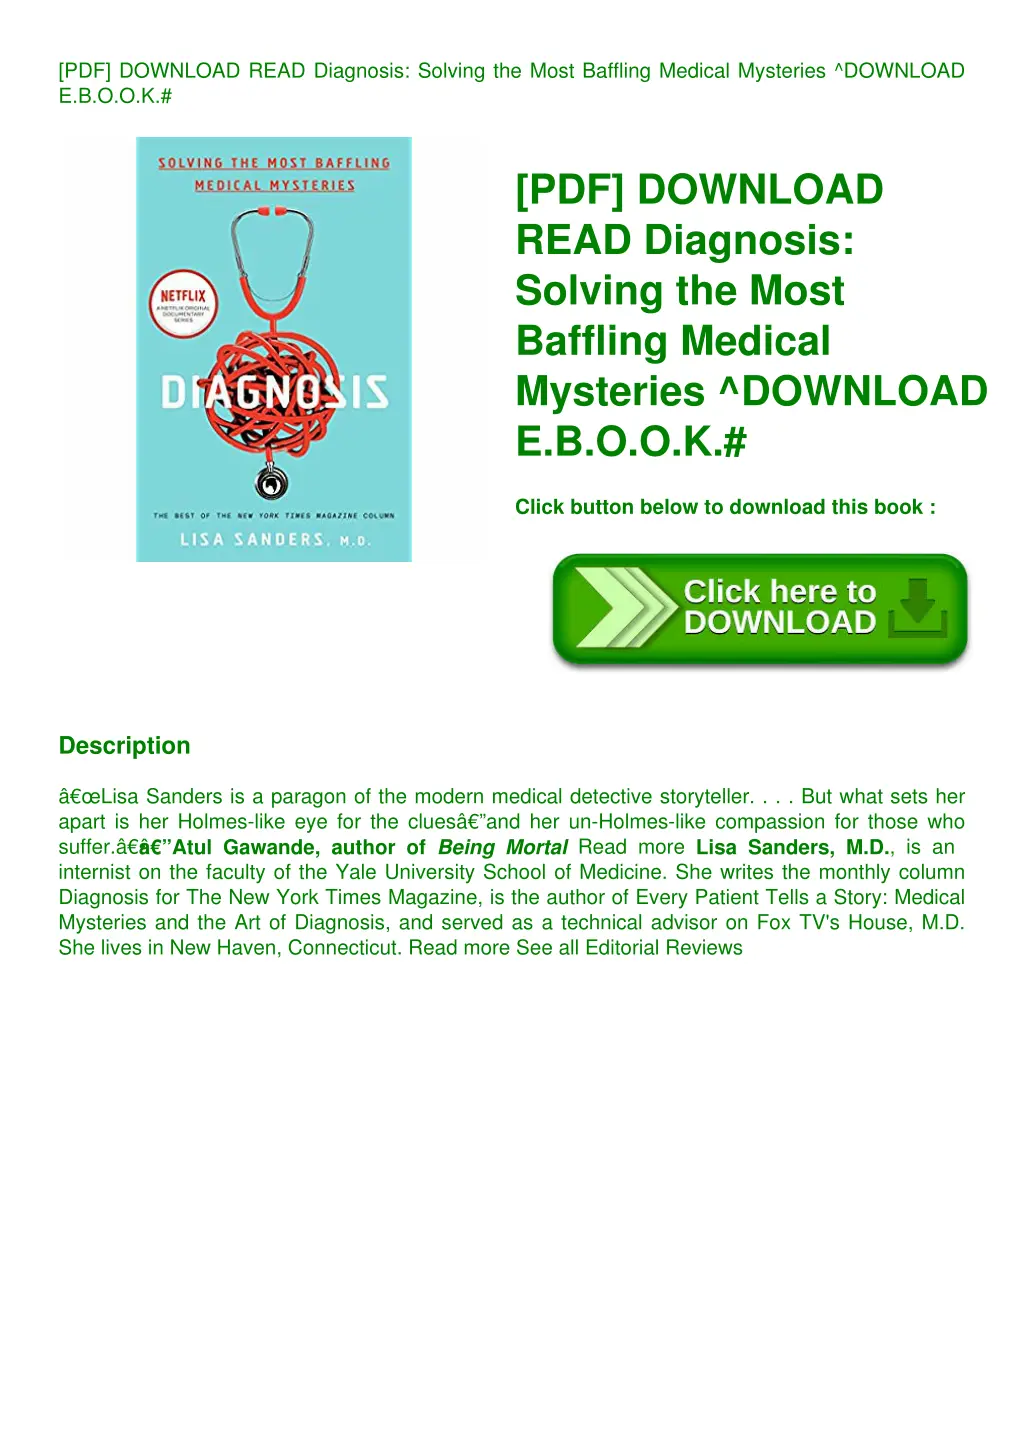 pdf download read diagnosis solving the most